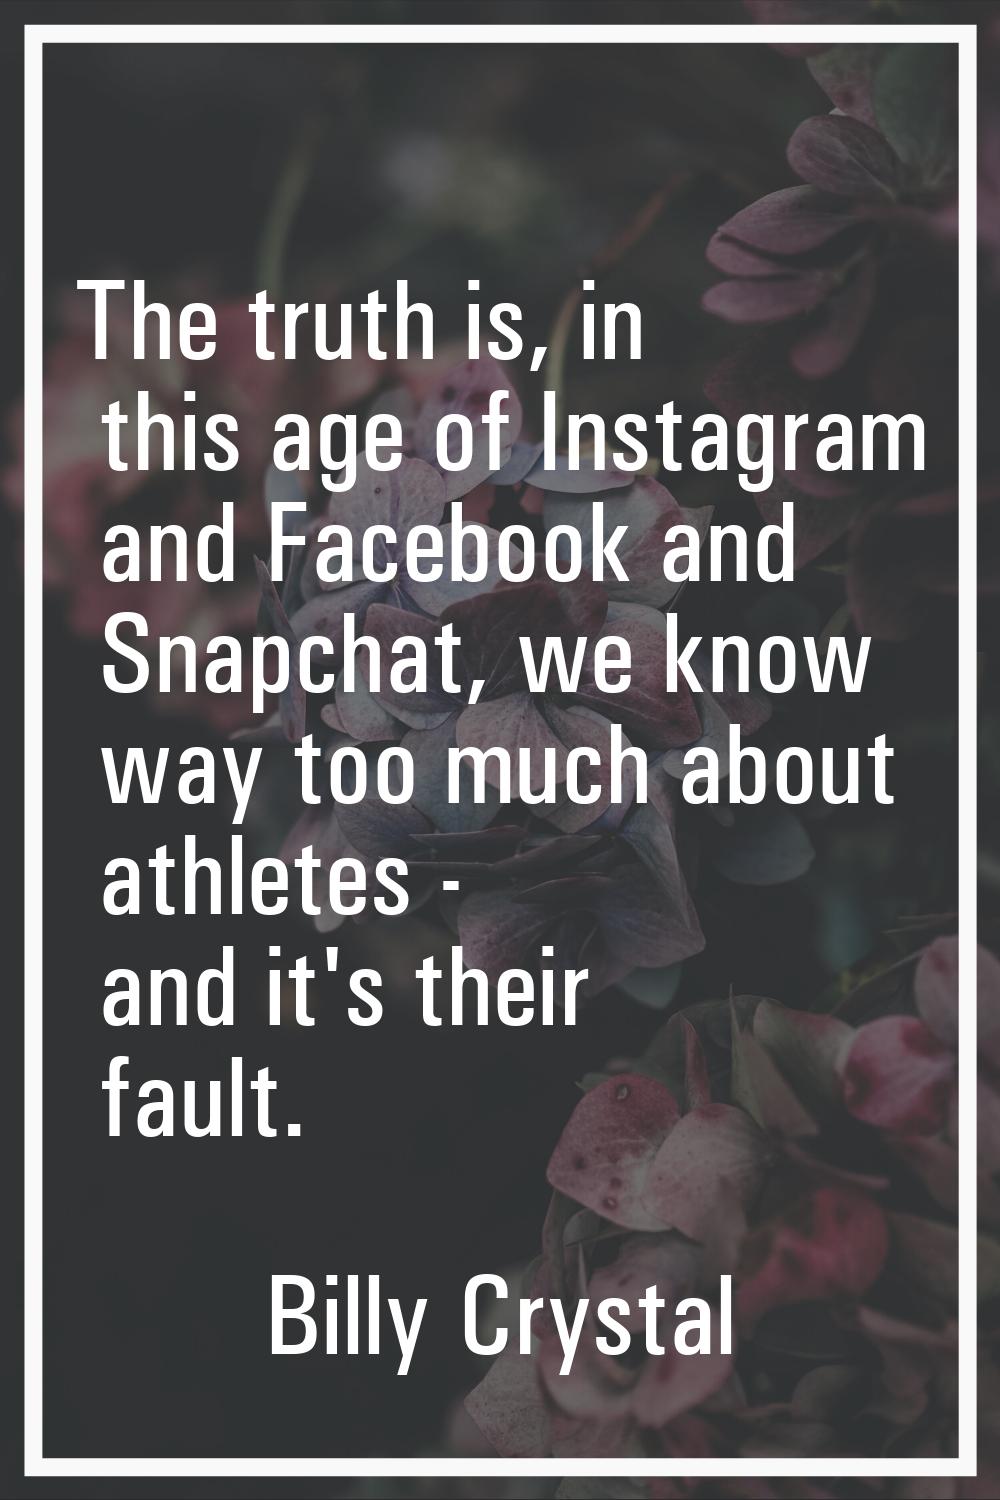 The truth is, in this age of Instagram and Facebook and Snapchat, we know way too much about athlet